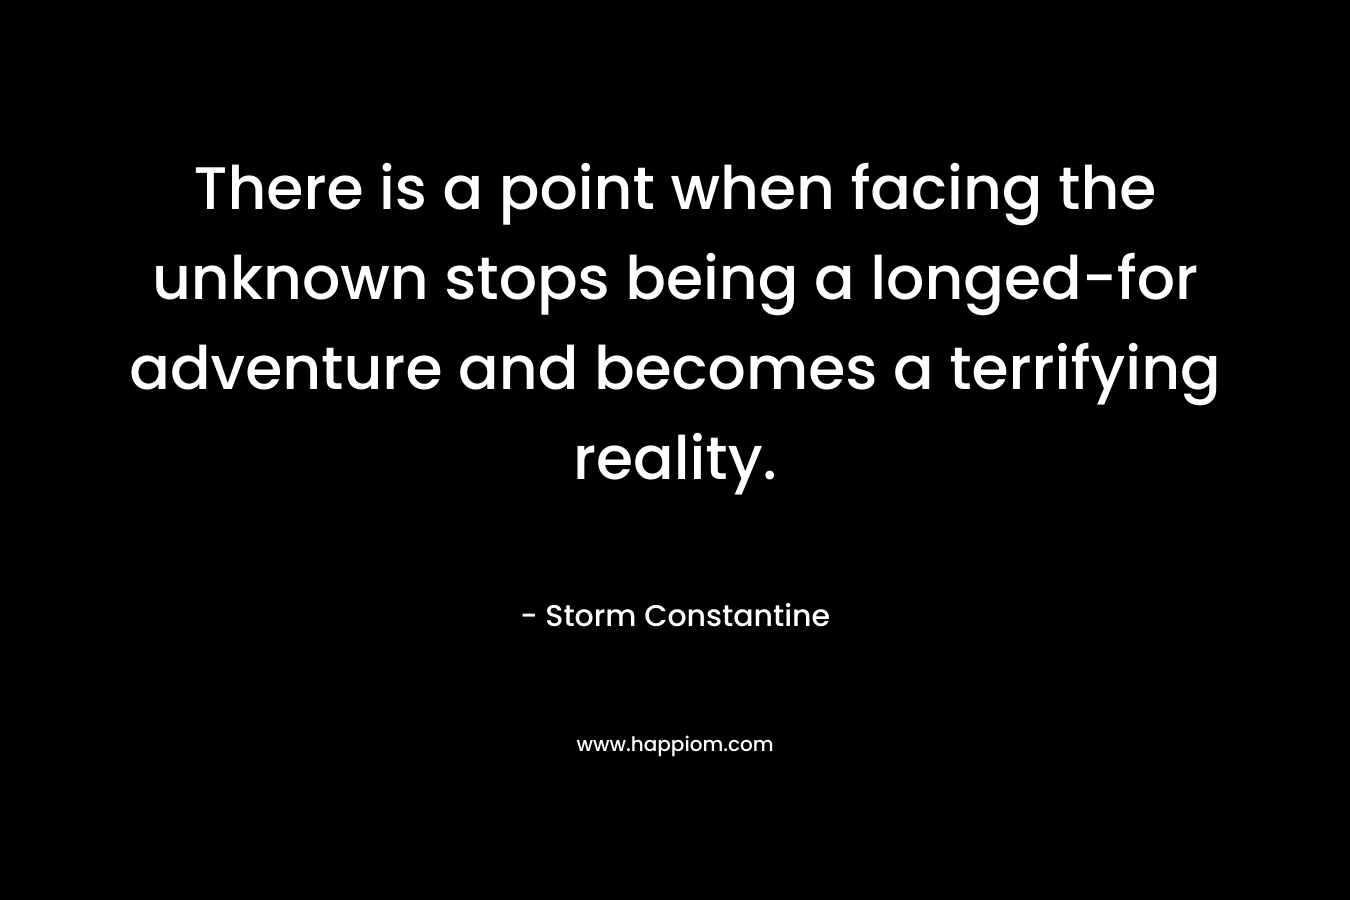 There is a point when facing the unknown stops being a longed-for adventure and becomes a terrifying reality. – Storm Constantine